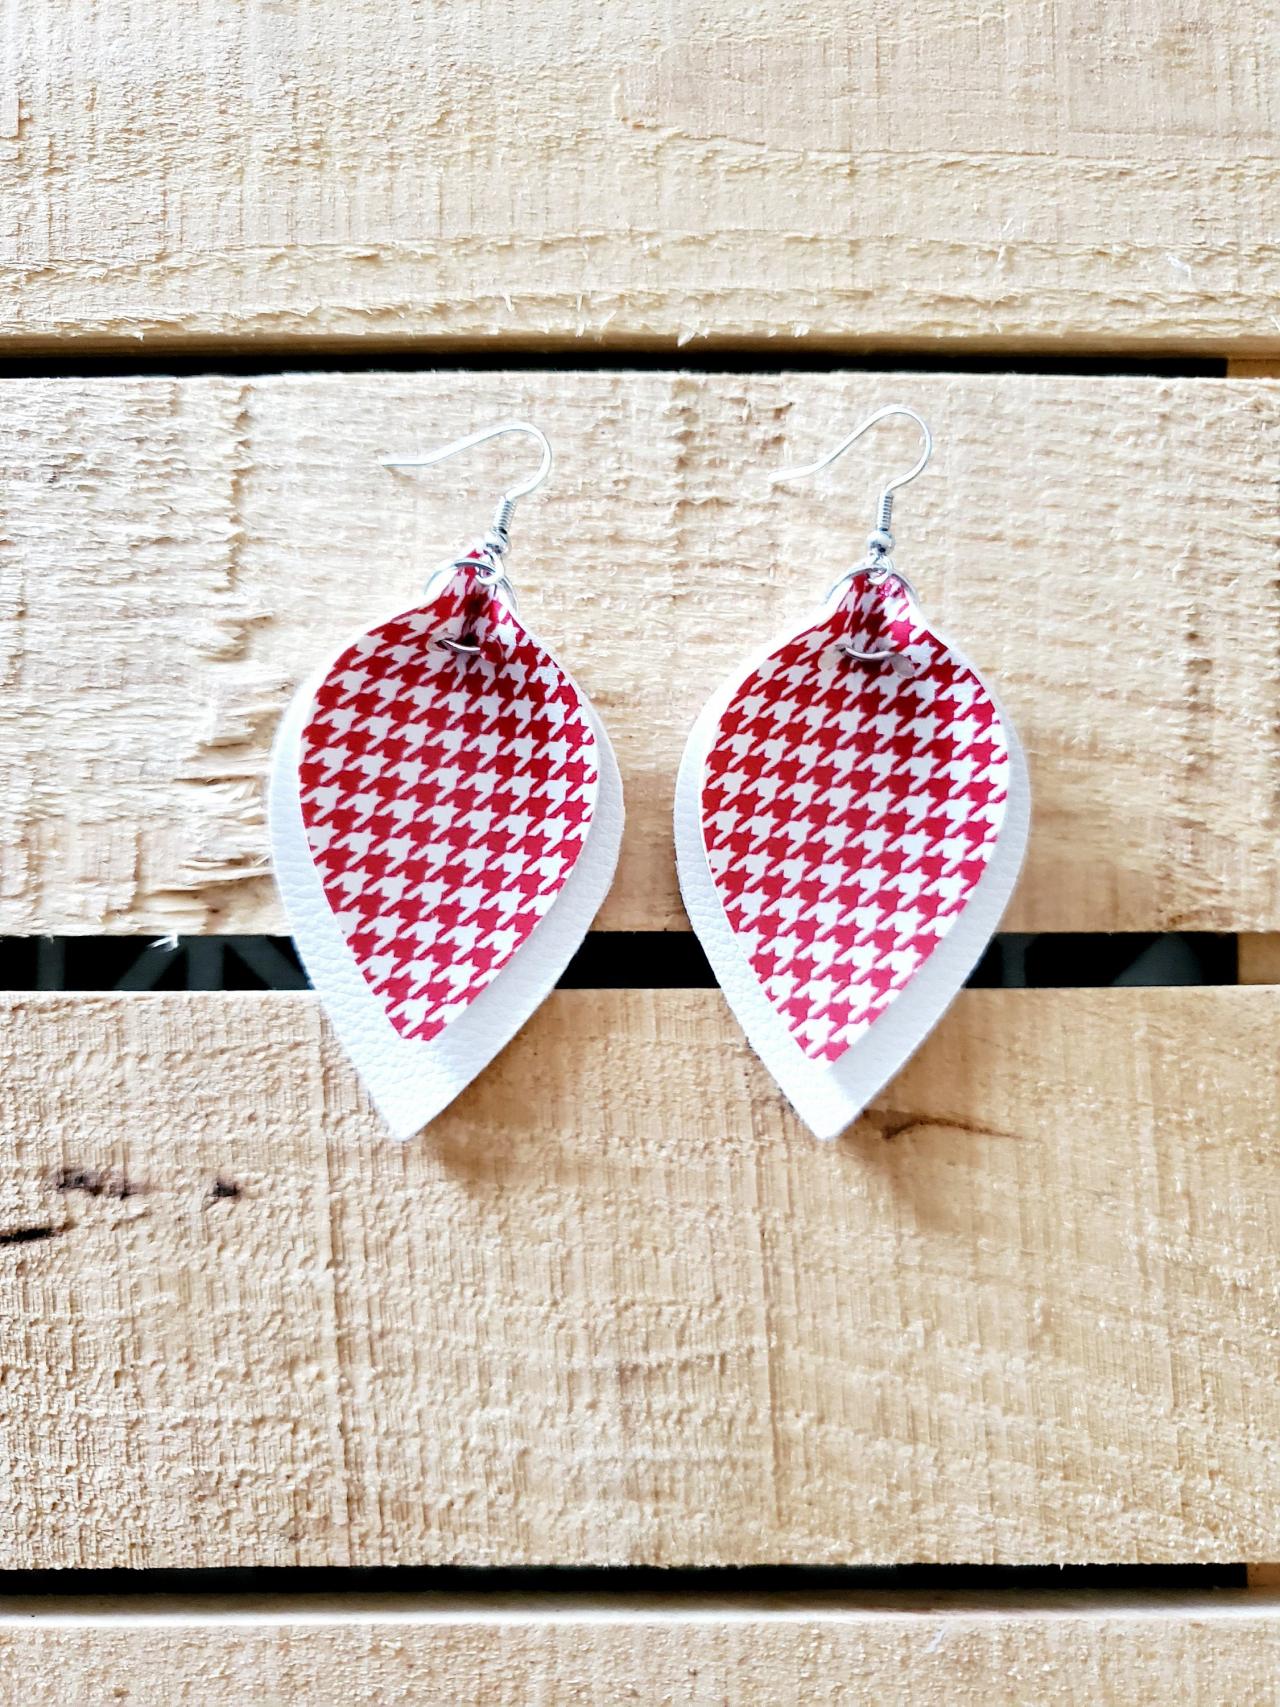 Red Houndstooth Leather Earrings, Pinched Leaf Earrings, Boho Jewelry, Red White Earrings, Rustic Jewelry, Boho Chic Leather Earrings